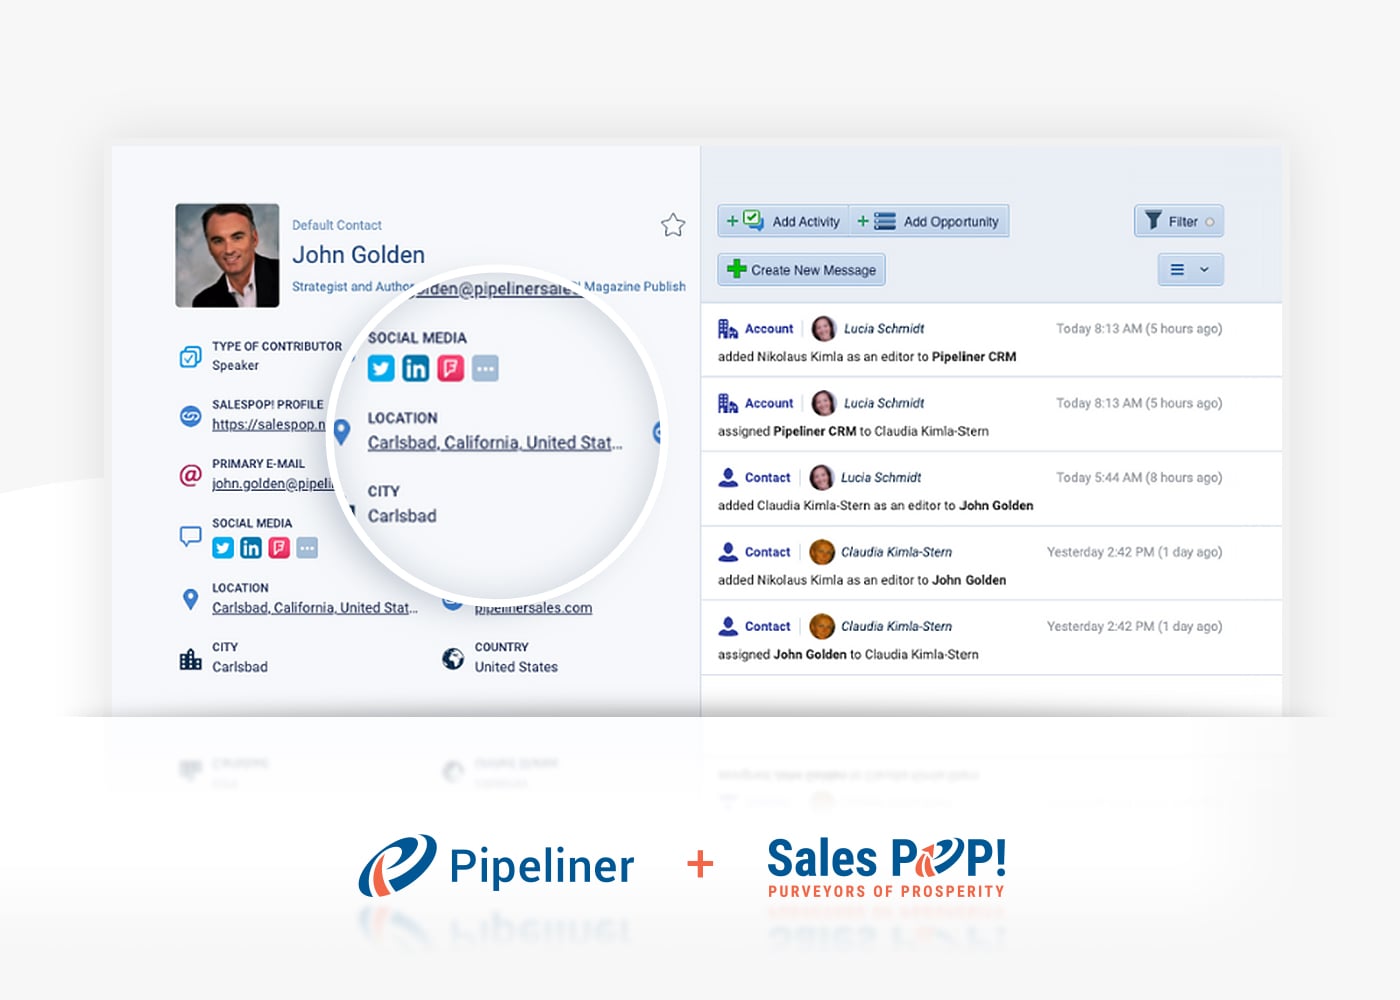 Find an expert in Pipeliner CRM